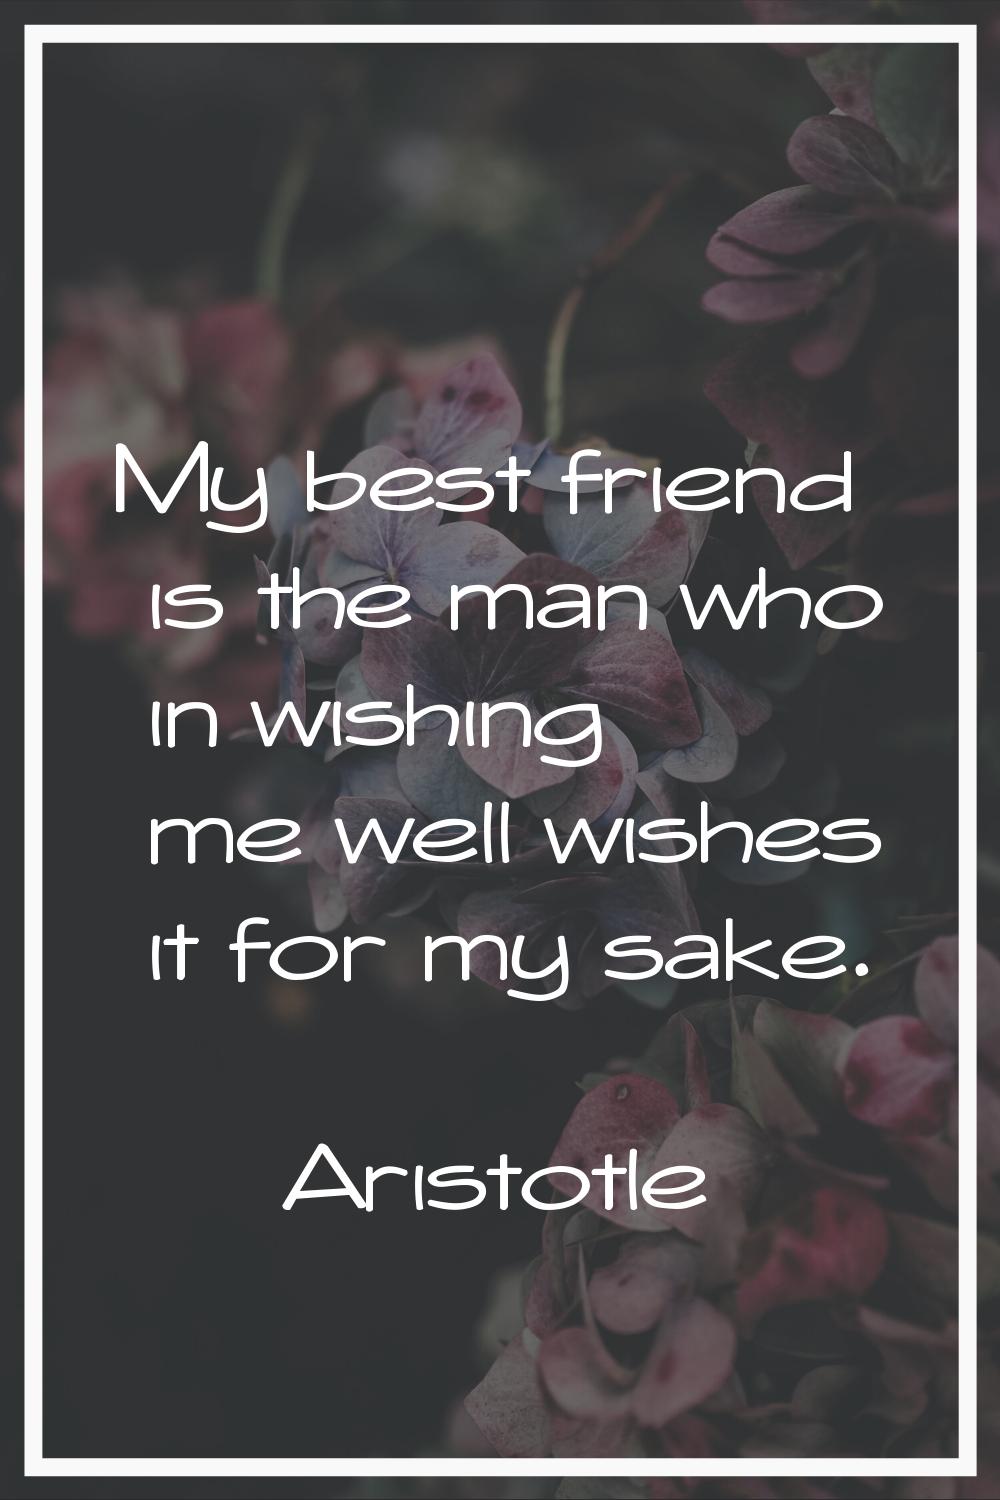 My best friend is the man who in wishing me well wishes it for my sake.